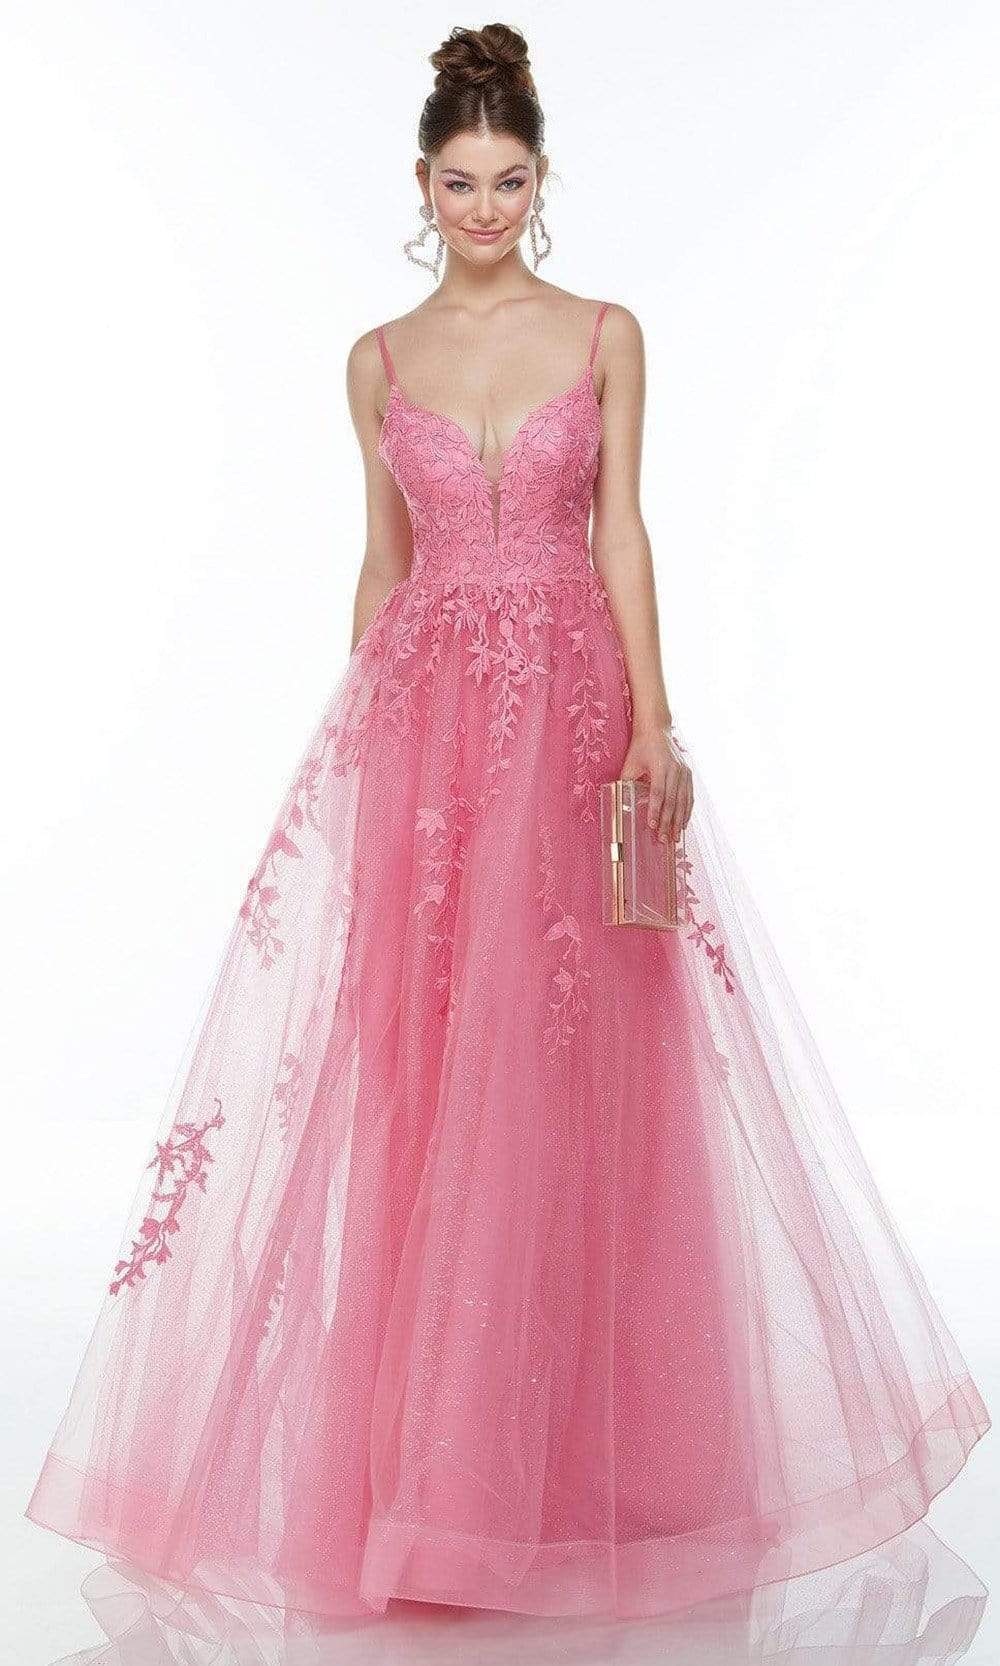 Alyce Paris - 61087 Sleeveless Embroidered Tulle Dress Prom Dresses 000 / Shocking Pink